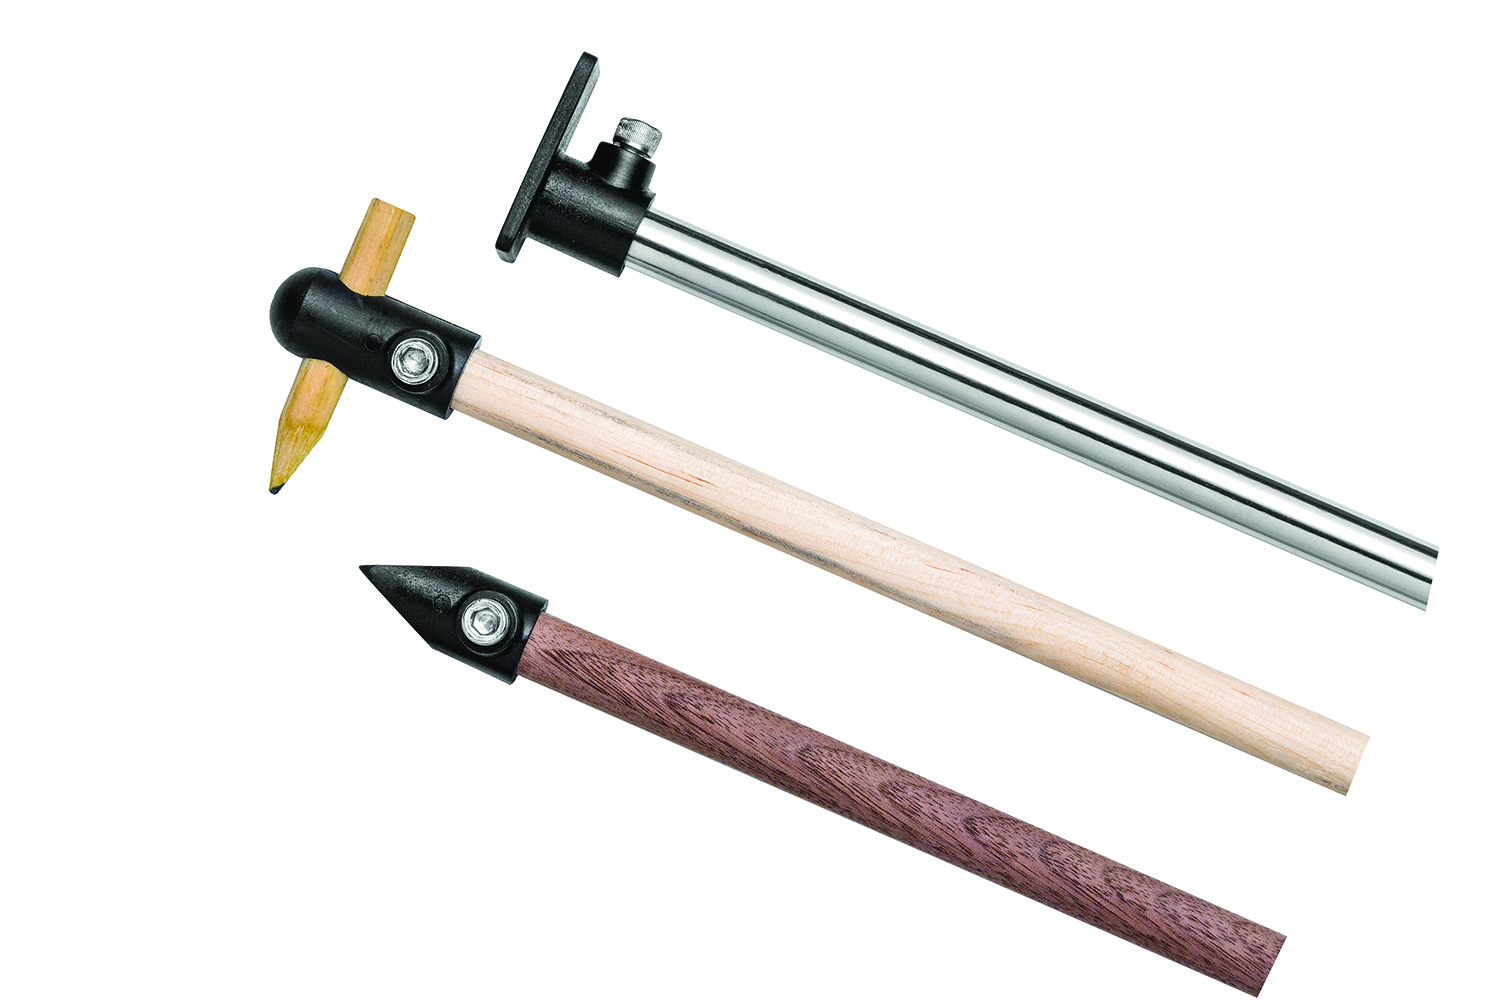 The three sets of interchangeable tips work with either standard 3/8" wooden  dowel stock or metal rods.